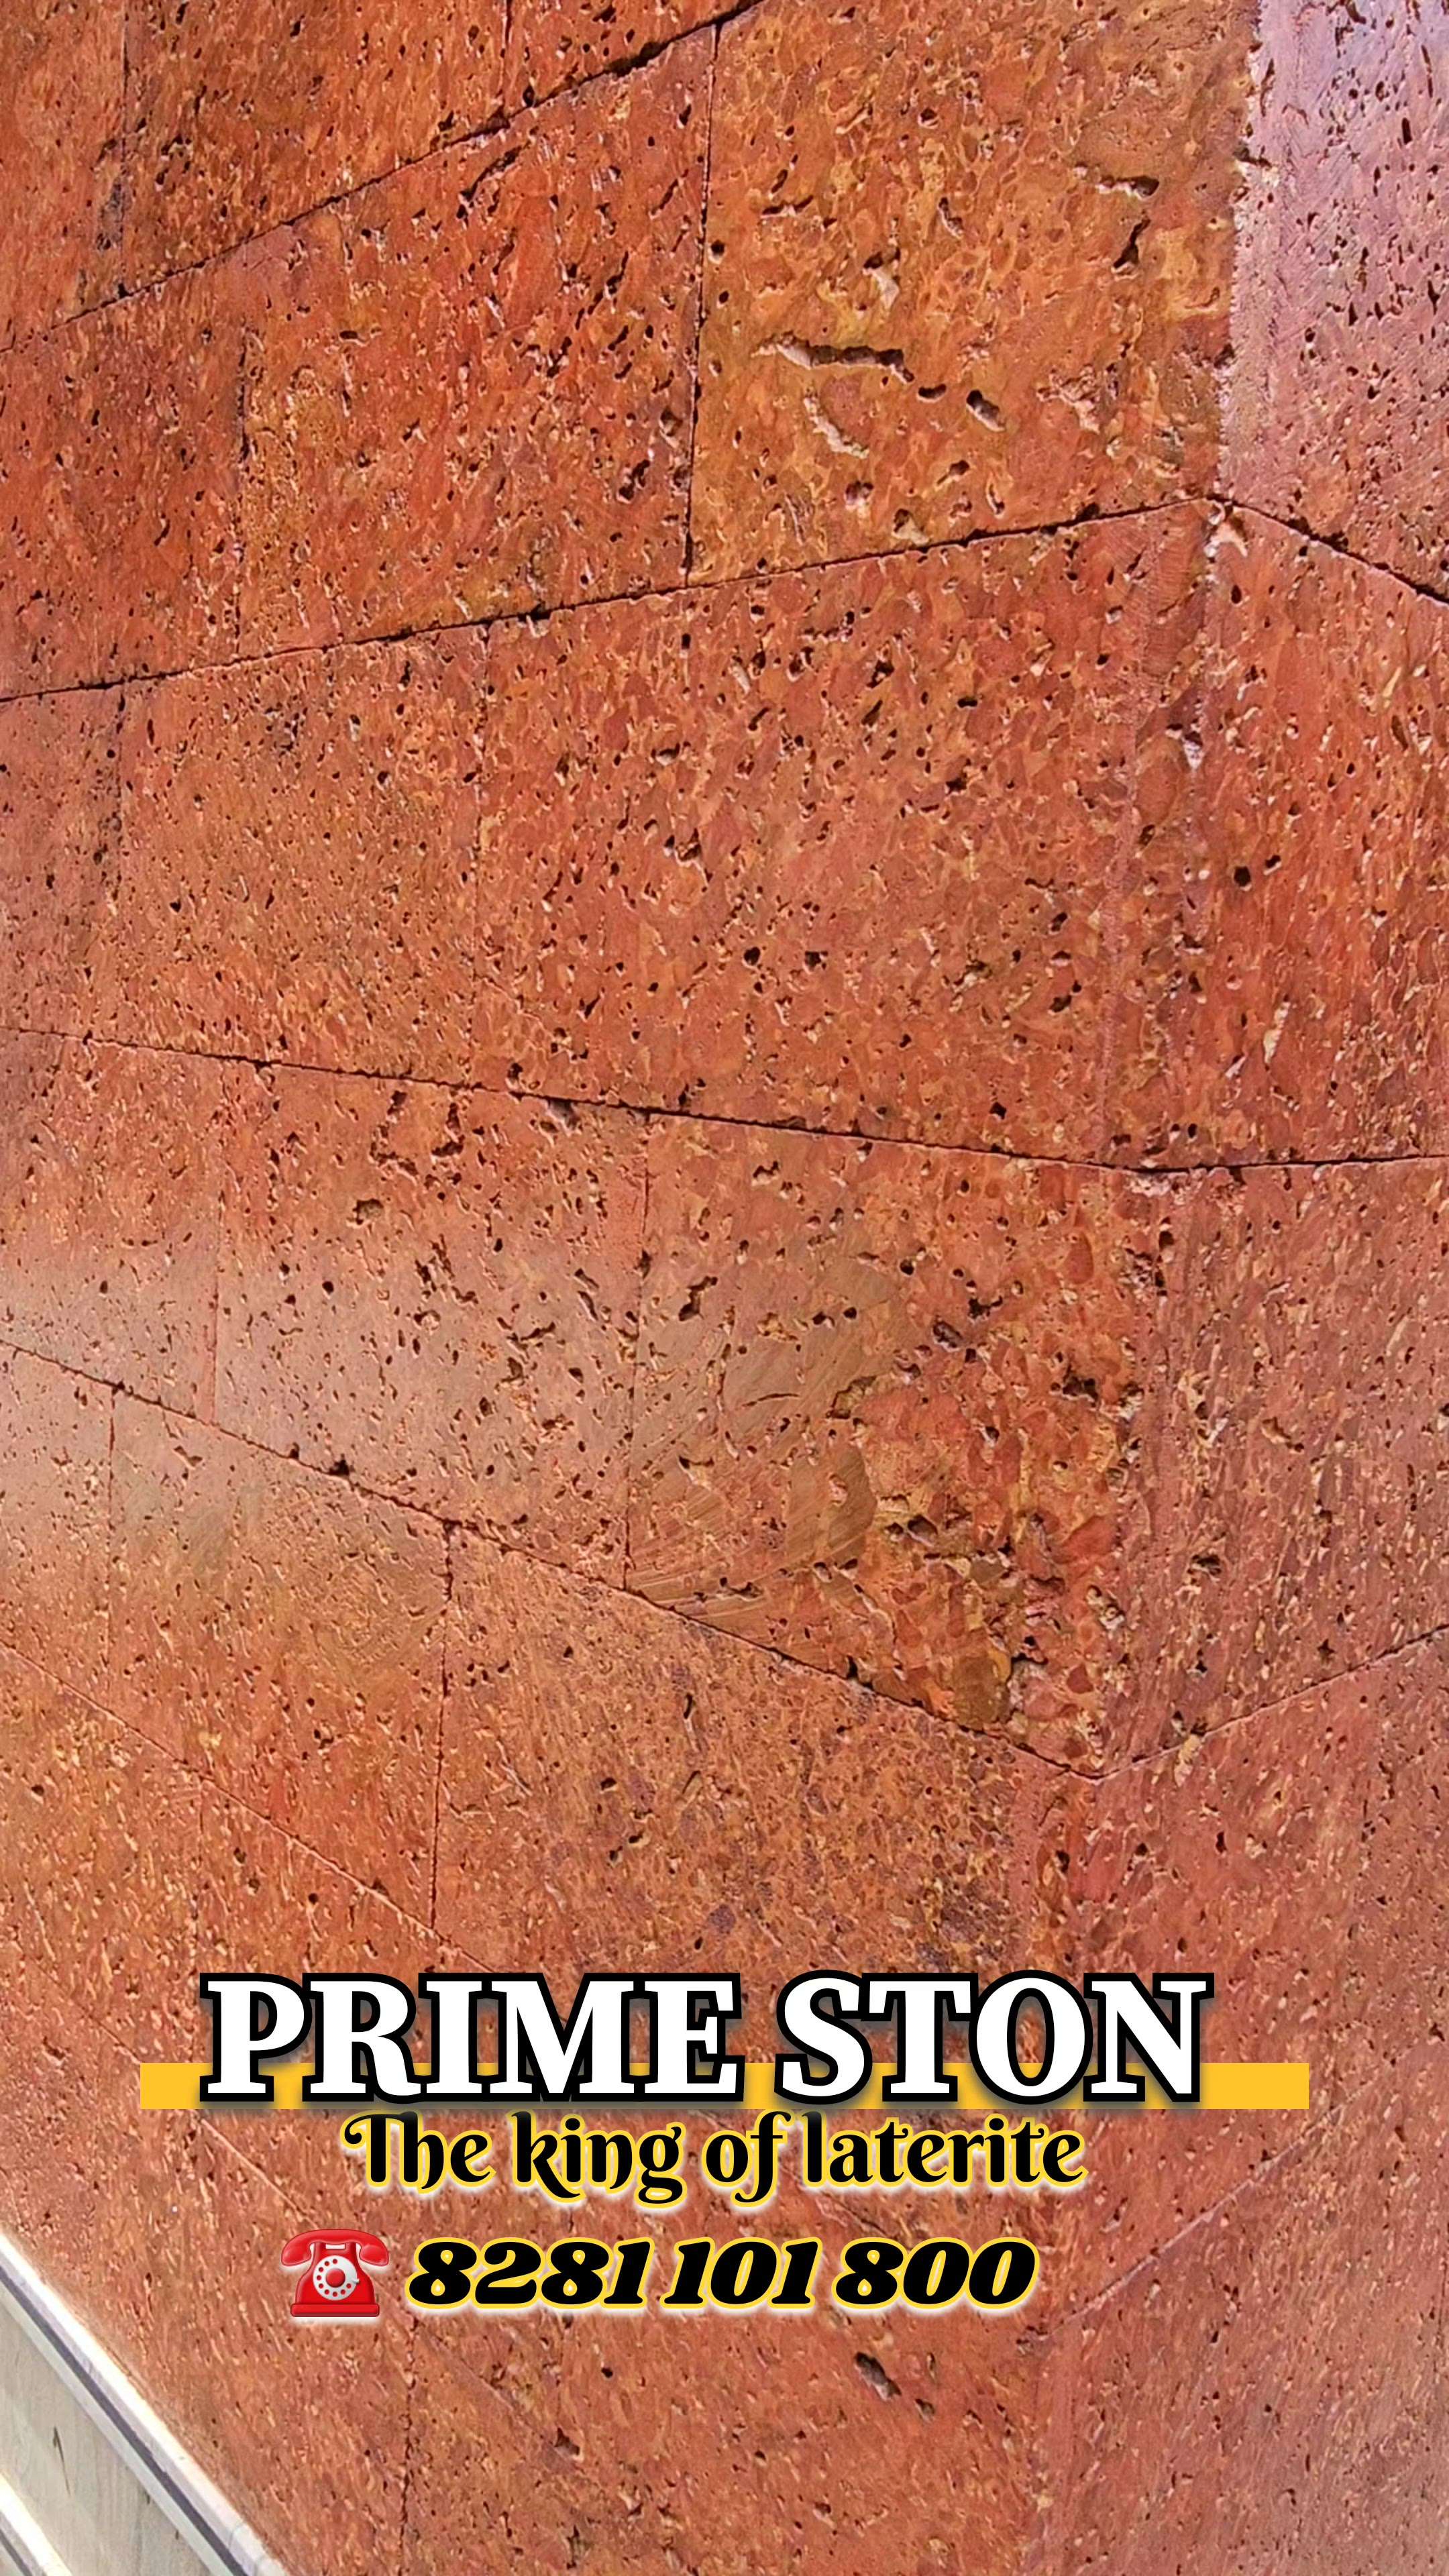 Amazing Laterite cladding work 😍
PRIME STON.. The king of laterite...

LateriteCladdingTiles #LateriteFlooringSlabs #LateritePavingStones #LateriteFurniture's #LateriteMonuments #LateriteSinglePillars ...

💚100% Natural Laterite Stone Products Manufacturer & laying contractor 💚

OUR SERVICES AVAILABLE ALLOVER INDIA 

Cladding available Sizes....
12/6,12/7,15/9,18/9,21/9,24/9 inches 20 mm thickness...

Paving available sizes....
12×12, 18×18, 24×24 inches 50 mm thickness

Slabs available sizes....
6/2 feet 25mm, 40 mm, 50 mm, 100 mm

Pillars available sizes..
From 24×6×6 to 7×12×12 feet 

Laterite furnitures and customized sizes also available...

Contact - 9048 533 834, 8848 88 3600, 8281 101 800
 

primelaterite@gmail.com 
www.primestone.co.in
https://youtu.be/CtoUAPbgX08
 #lateritefurniture #lateritemonuments #lateritesinglepillars #lateriteexteriorpaving #bestlaterite #lateritecladding #lateritewall